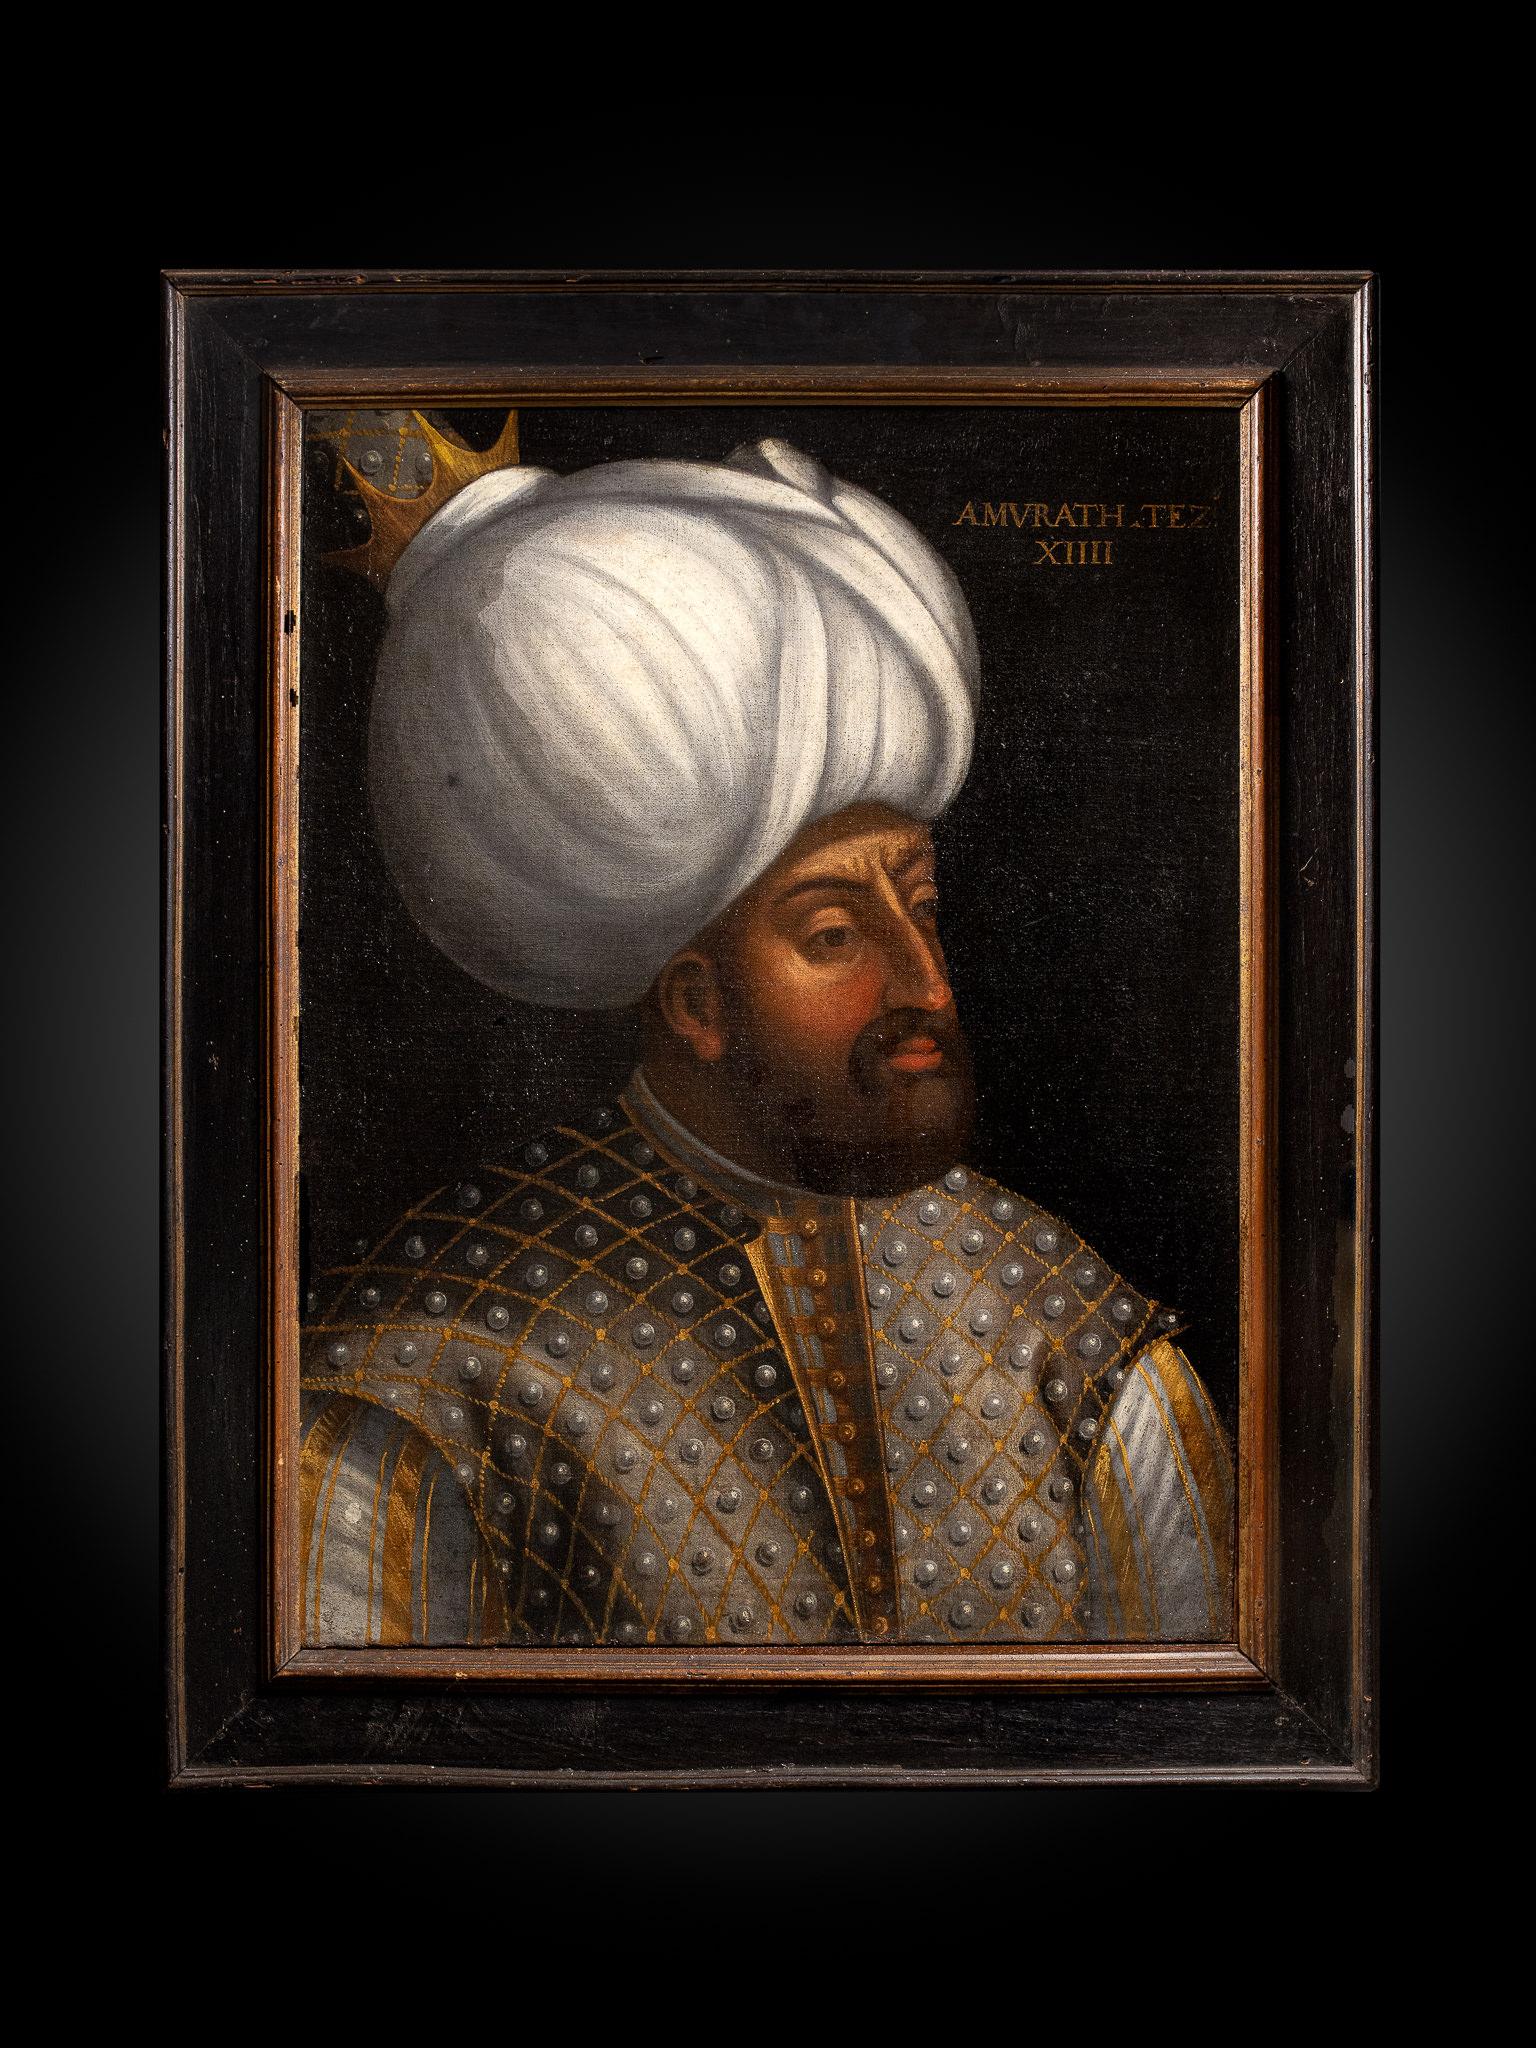 Portrait of Sultan Isa Çelebi (died 1403),identity inscribed in Latin.
Portrait of Sultan Murad III (1546–1595), identity inscribed in Latin.

The present paintings refer to the works attributed to a follower of Paolo Veronese in the Bayerische